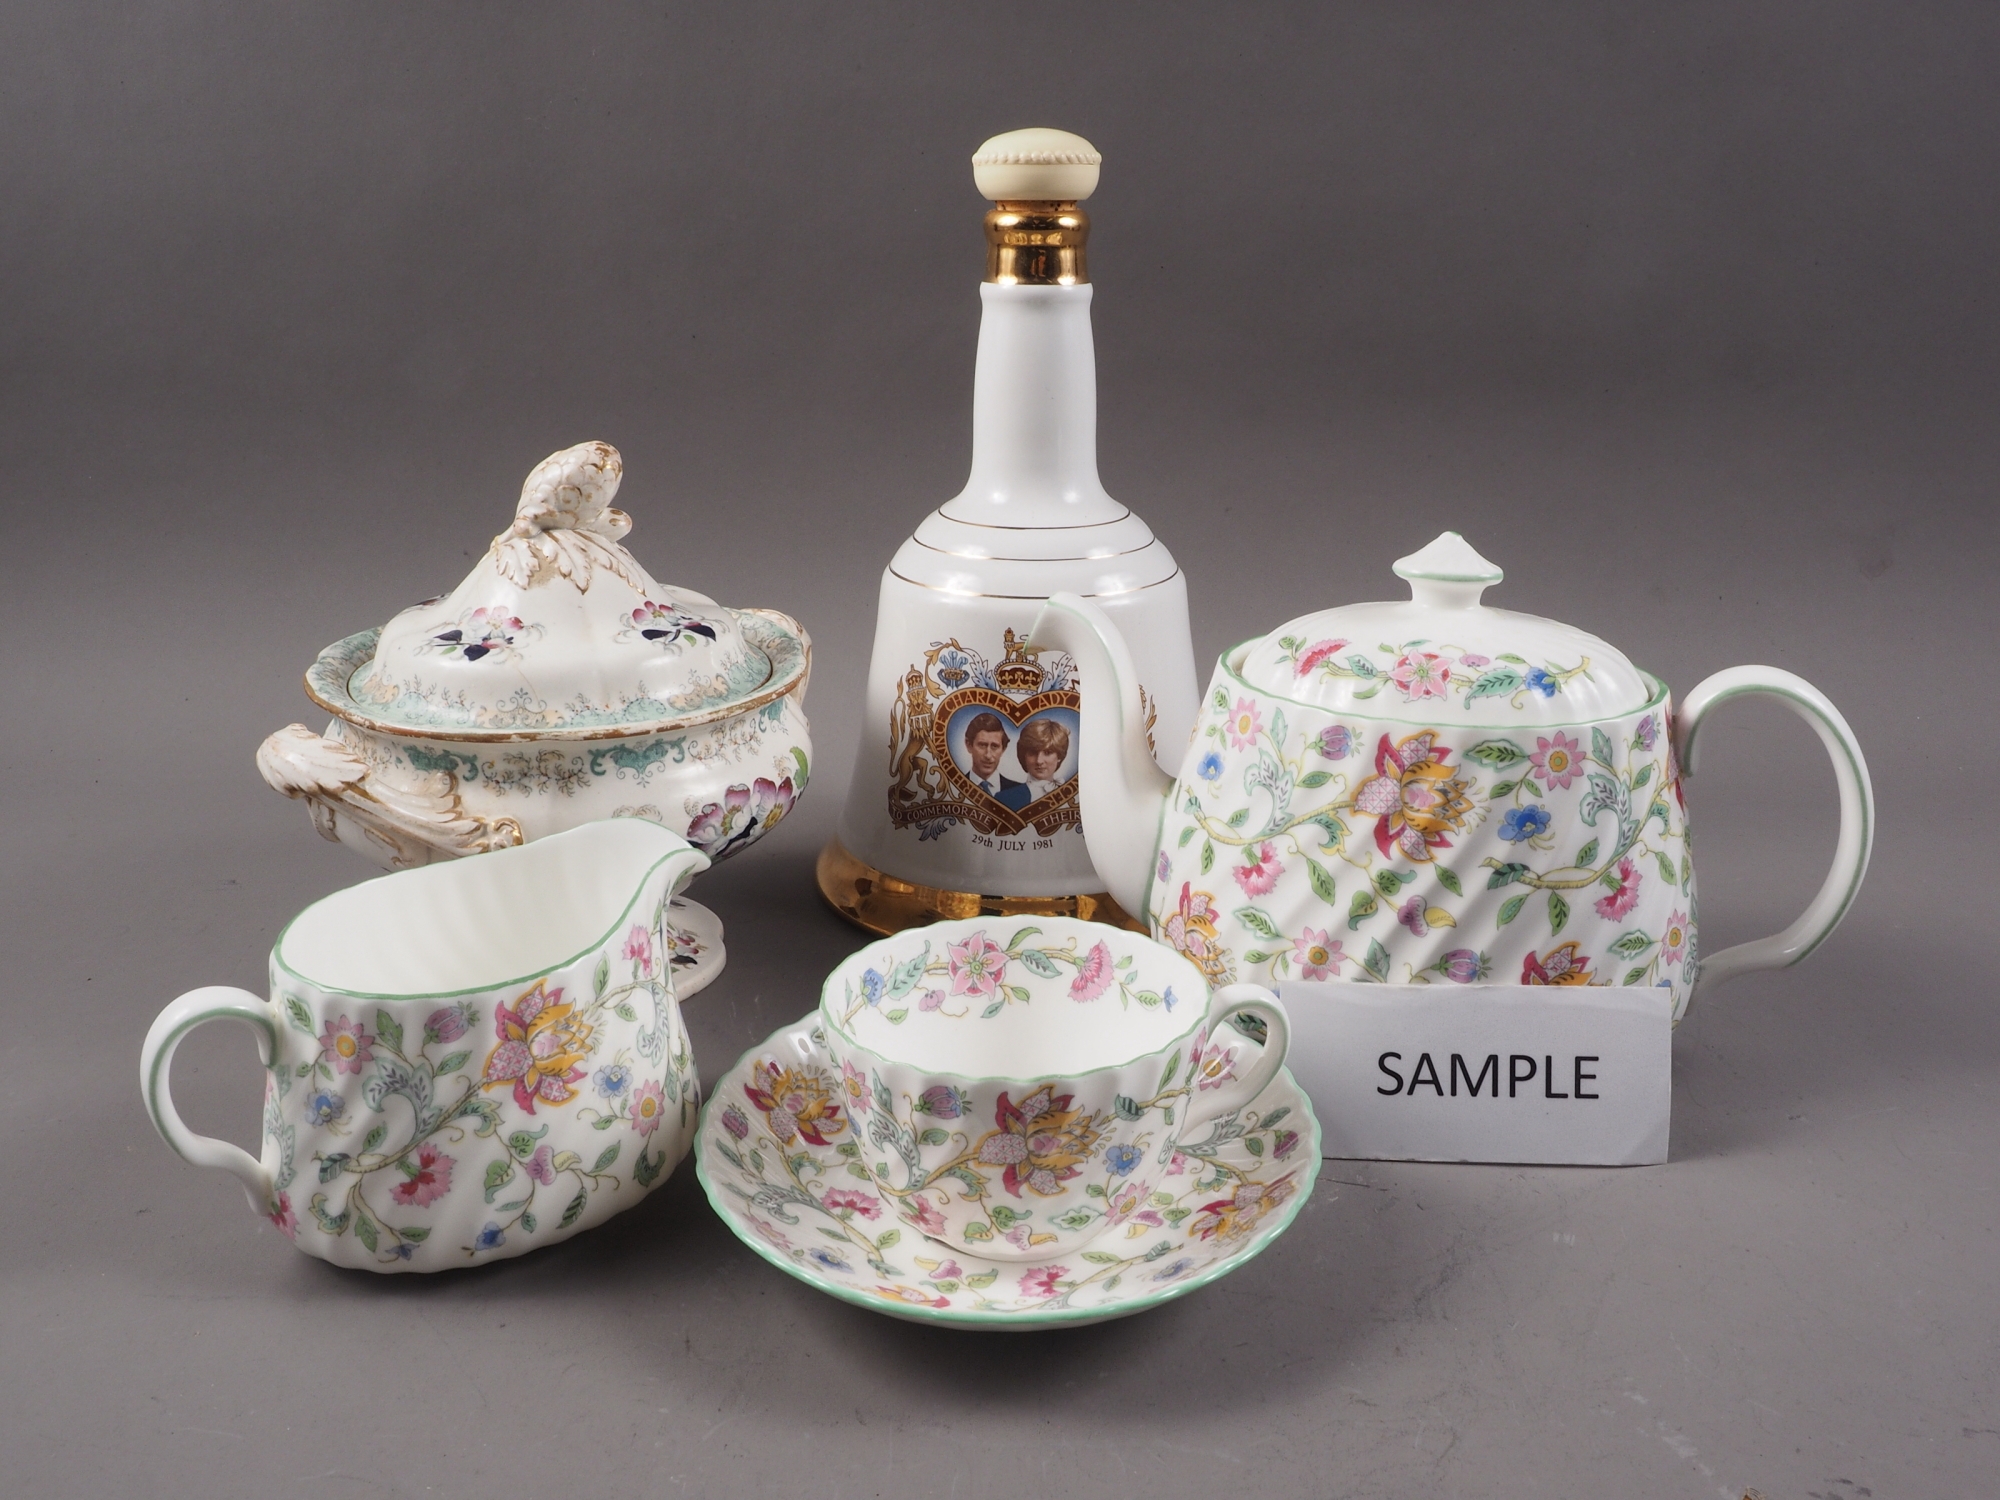 A Minton "Haddon Hall" pattern part teaset and other items